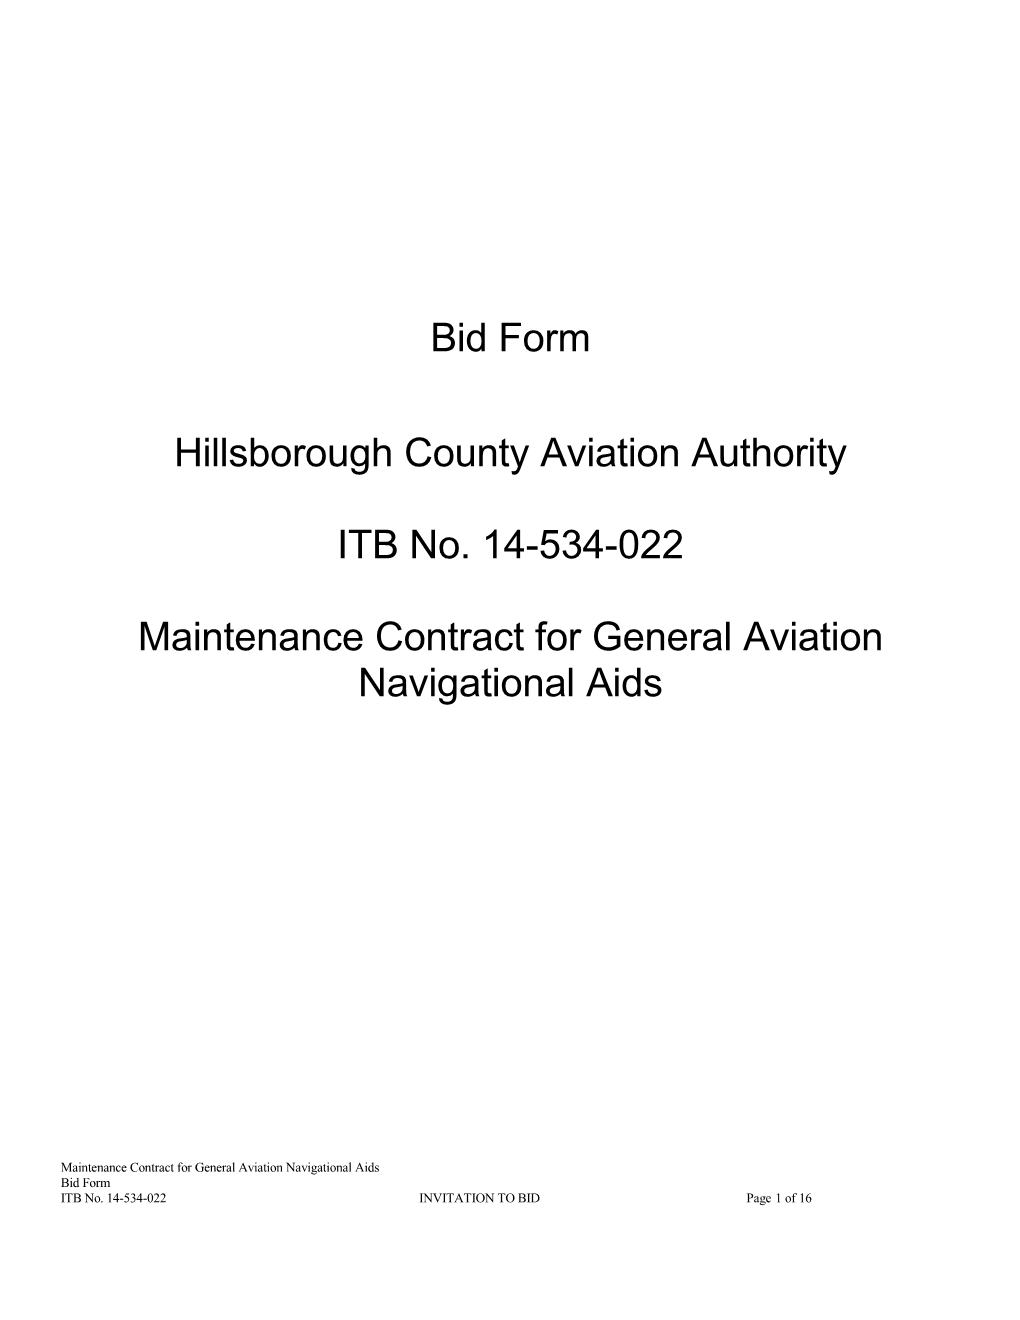 Maintenance Contract for General Aviation Navigational Aids